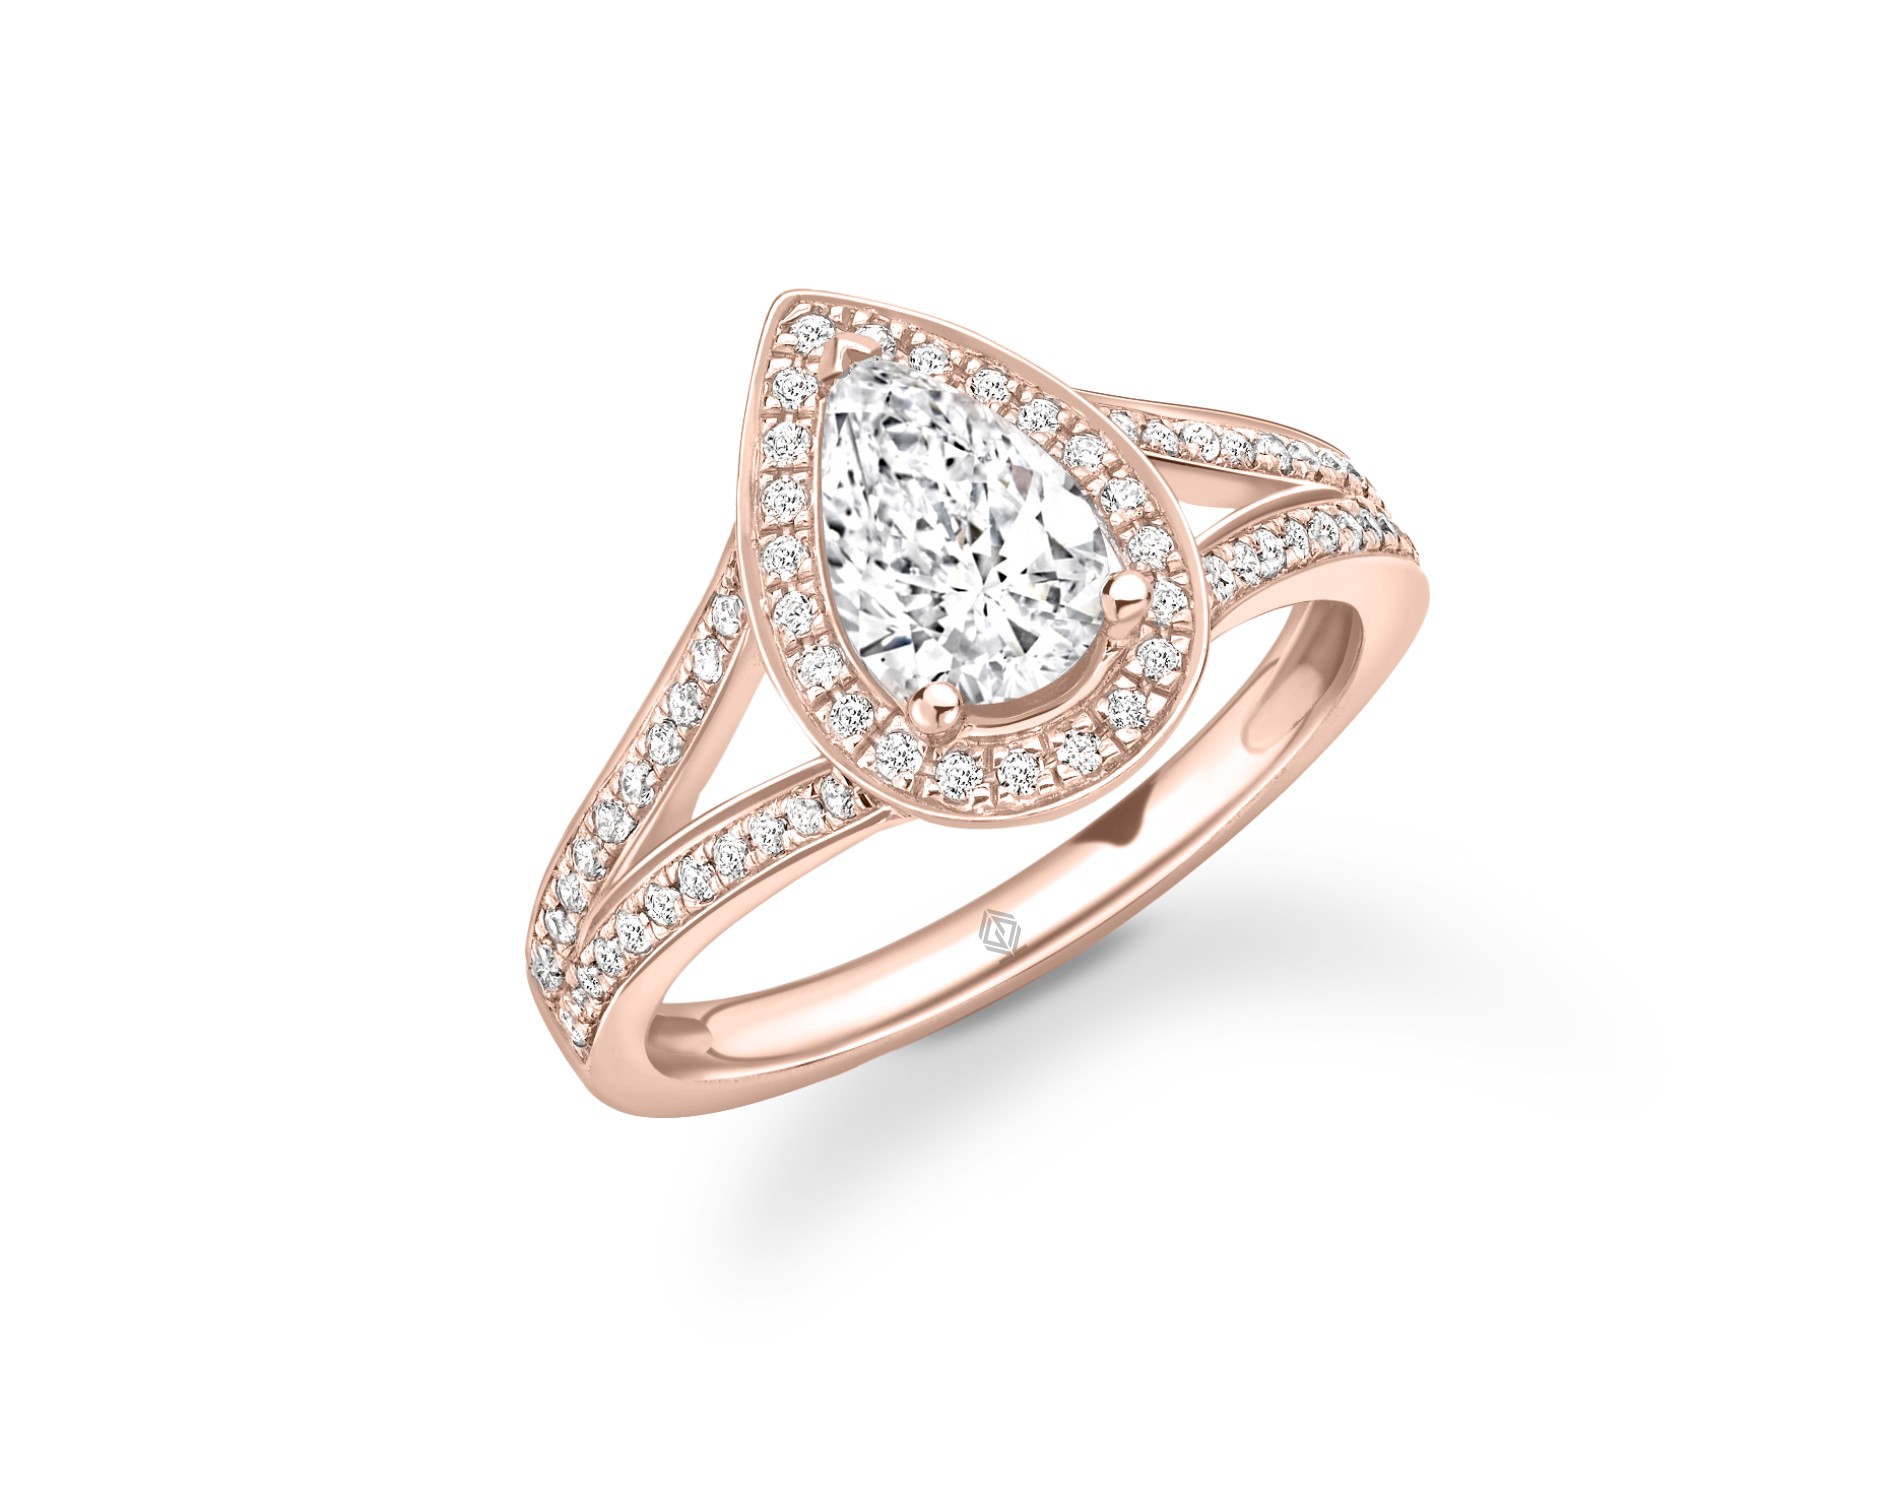 18K ROSE GOLD HALO PEAR CUT DIAMOND ENGAGEMENT RING WITH SPLIT SHANK AND SIDE STONES